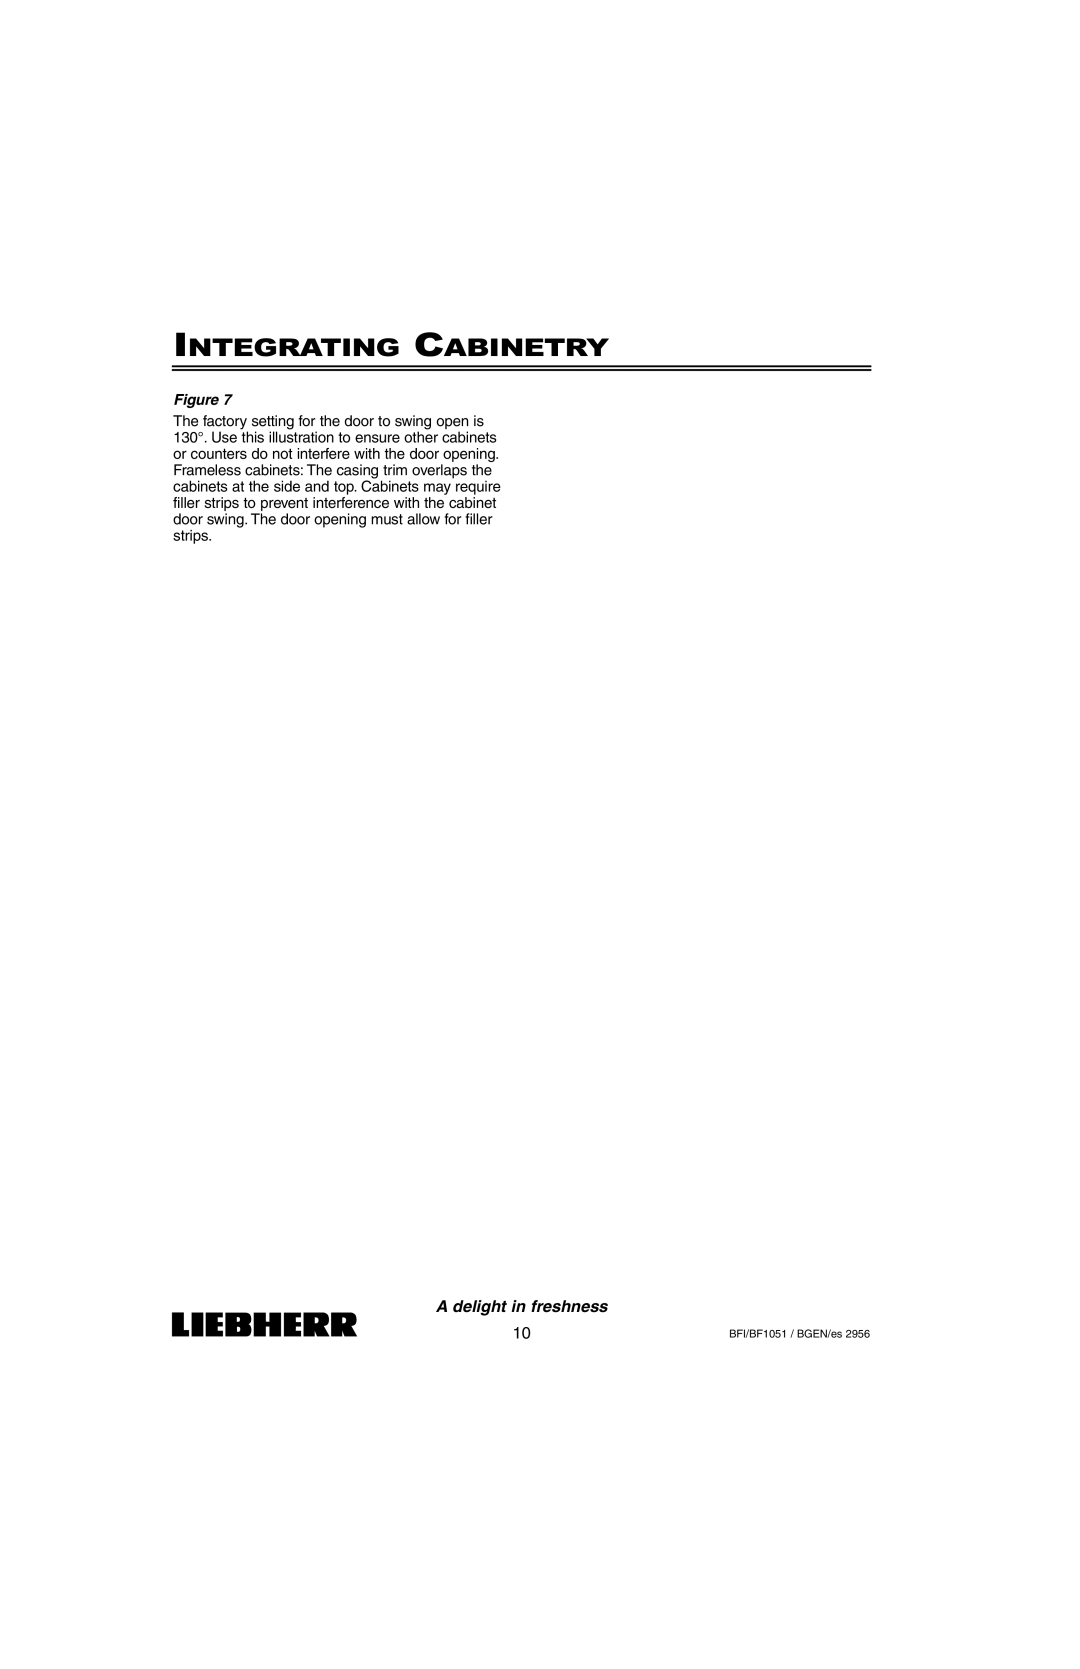 Liebherr BFI1051, BF1051 installation instructions Integrating Cabinetry, A delight in freshness, Figure 